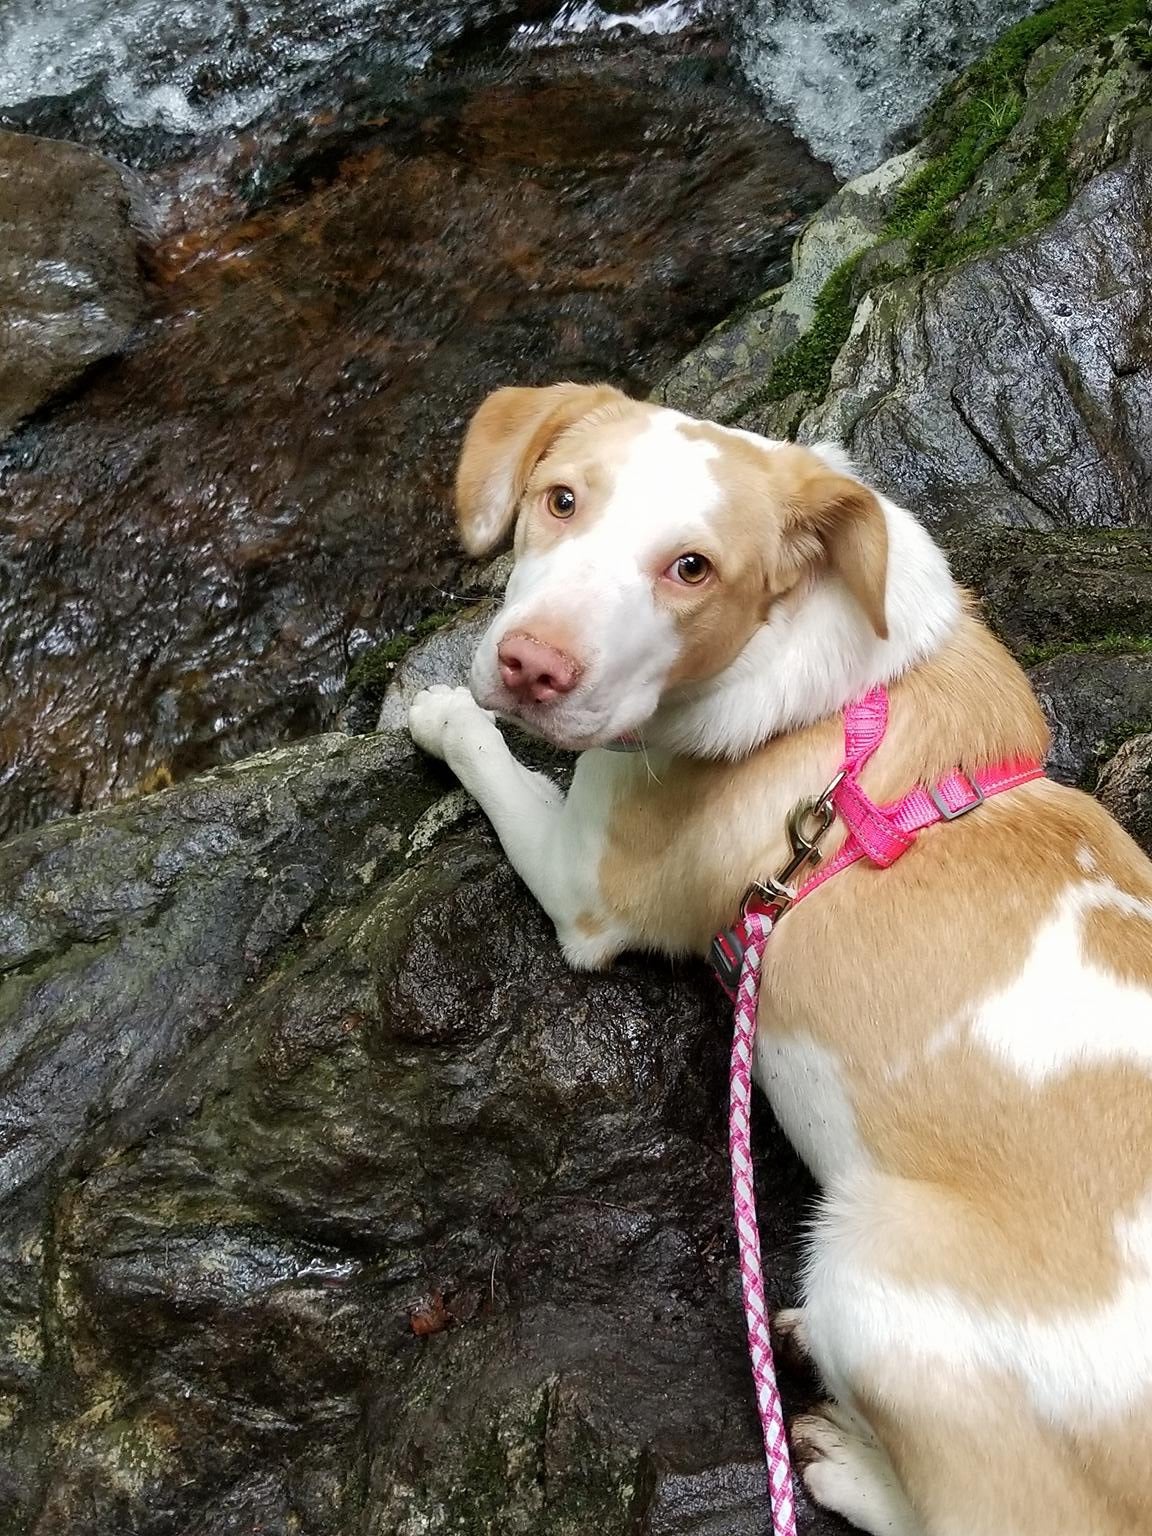 Pup loved hiking to laurel falls